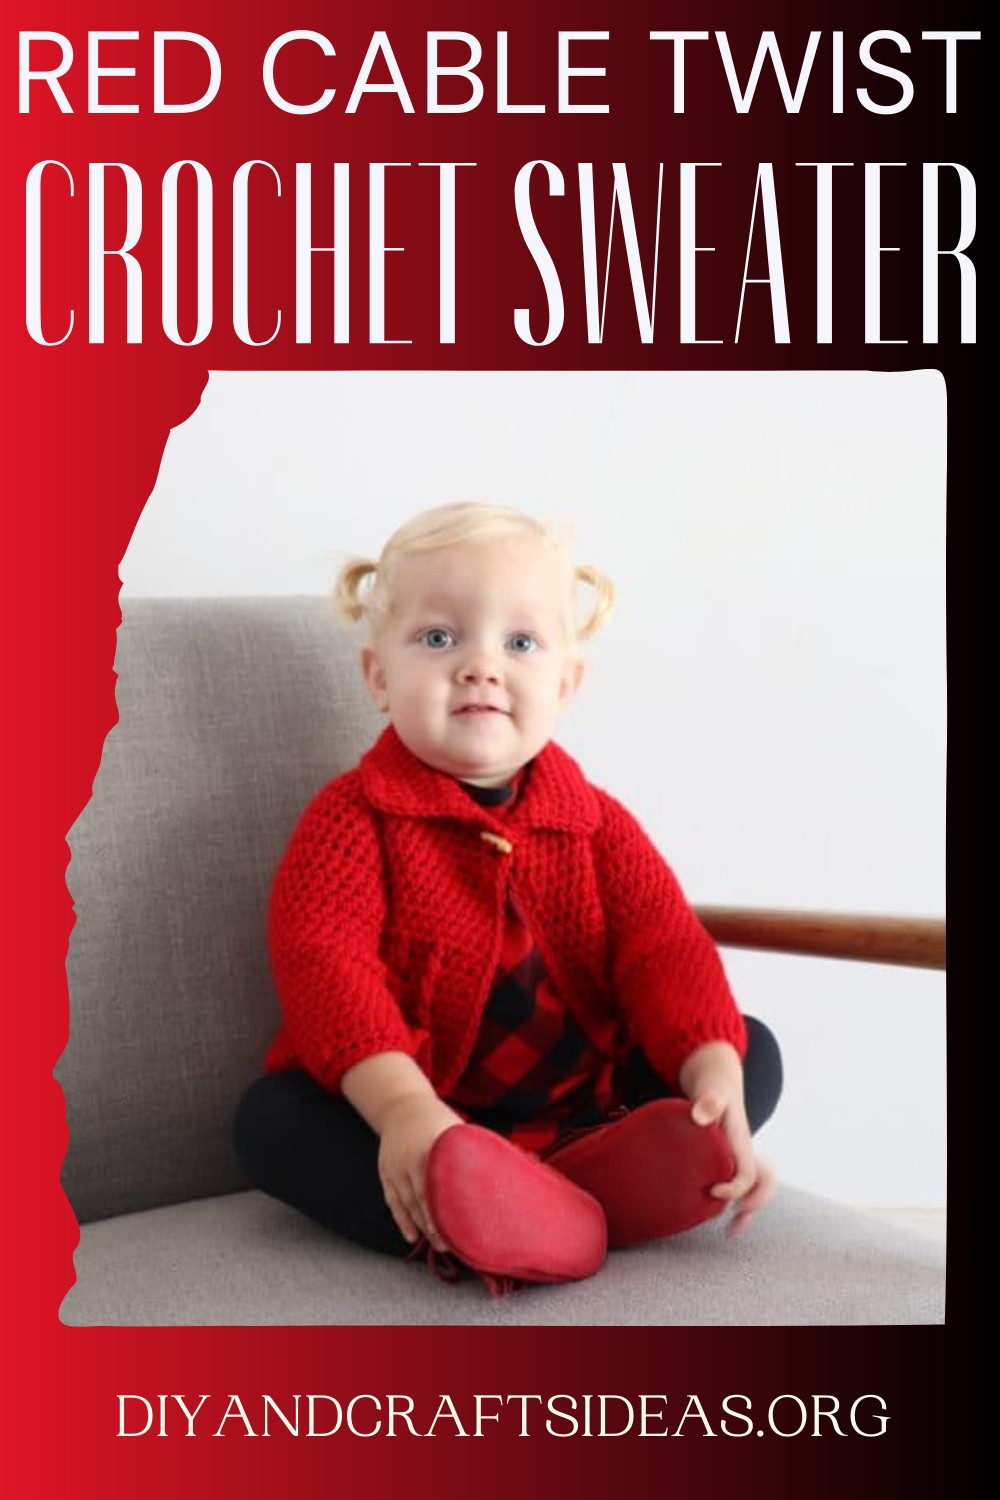 Red Cable Twist Crochet Sweater